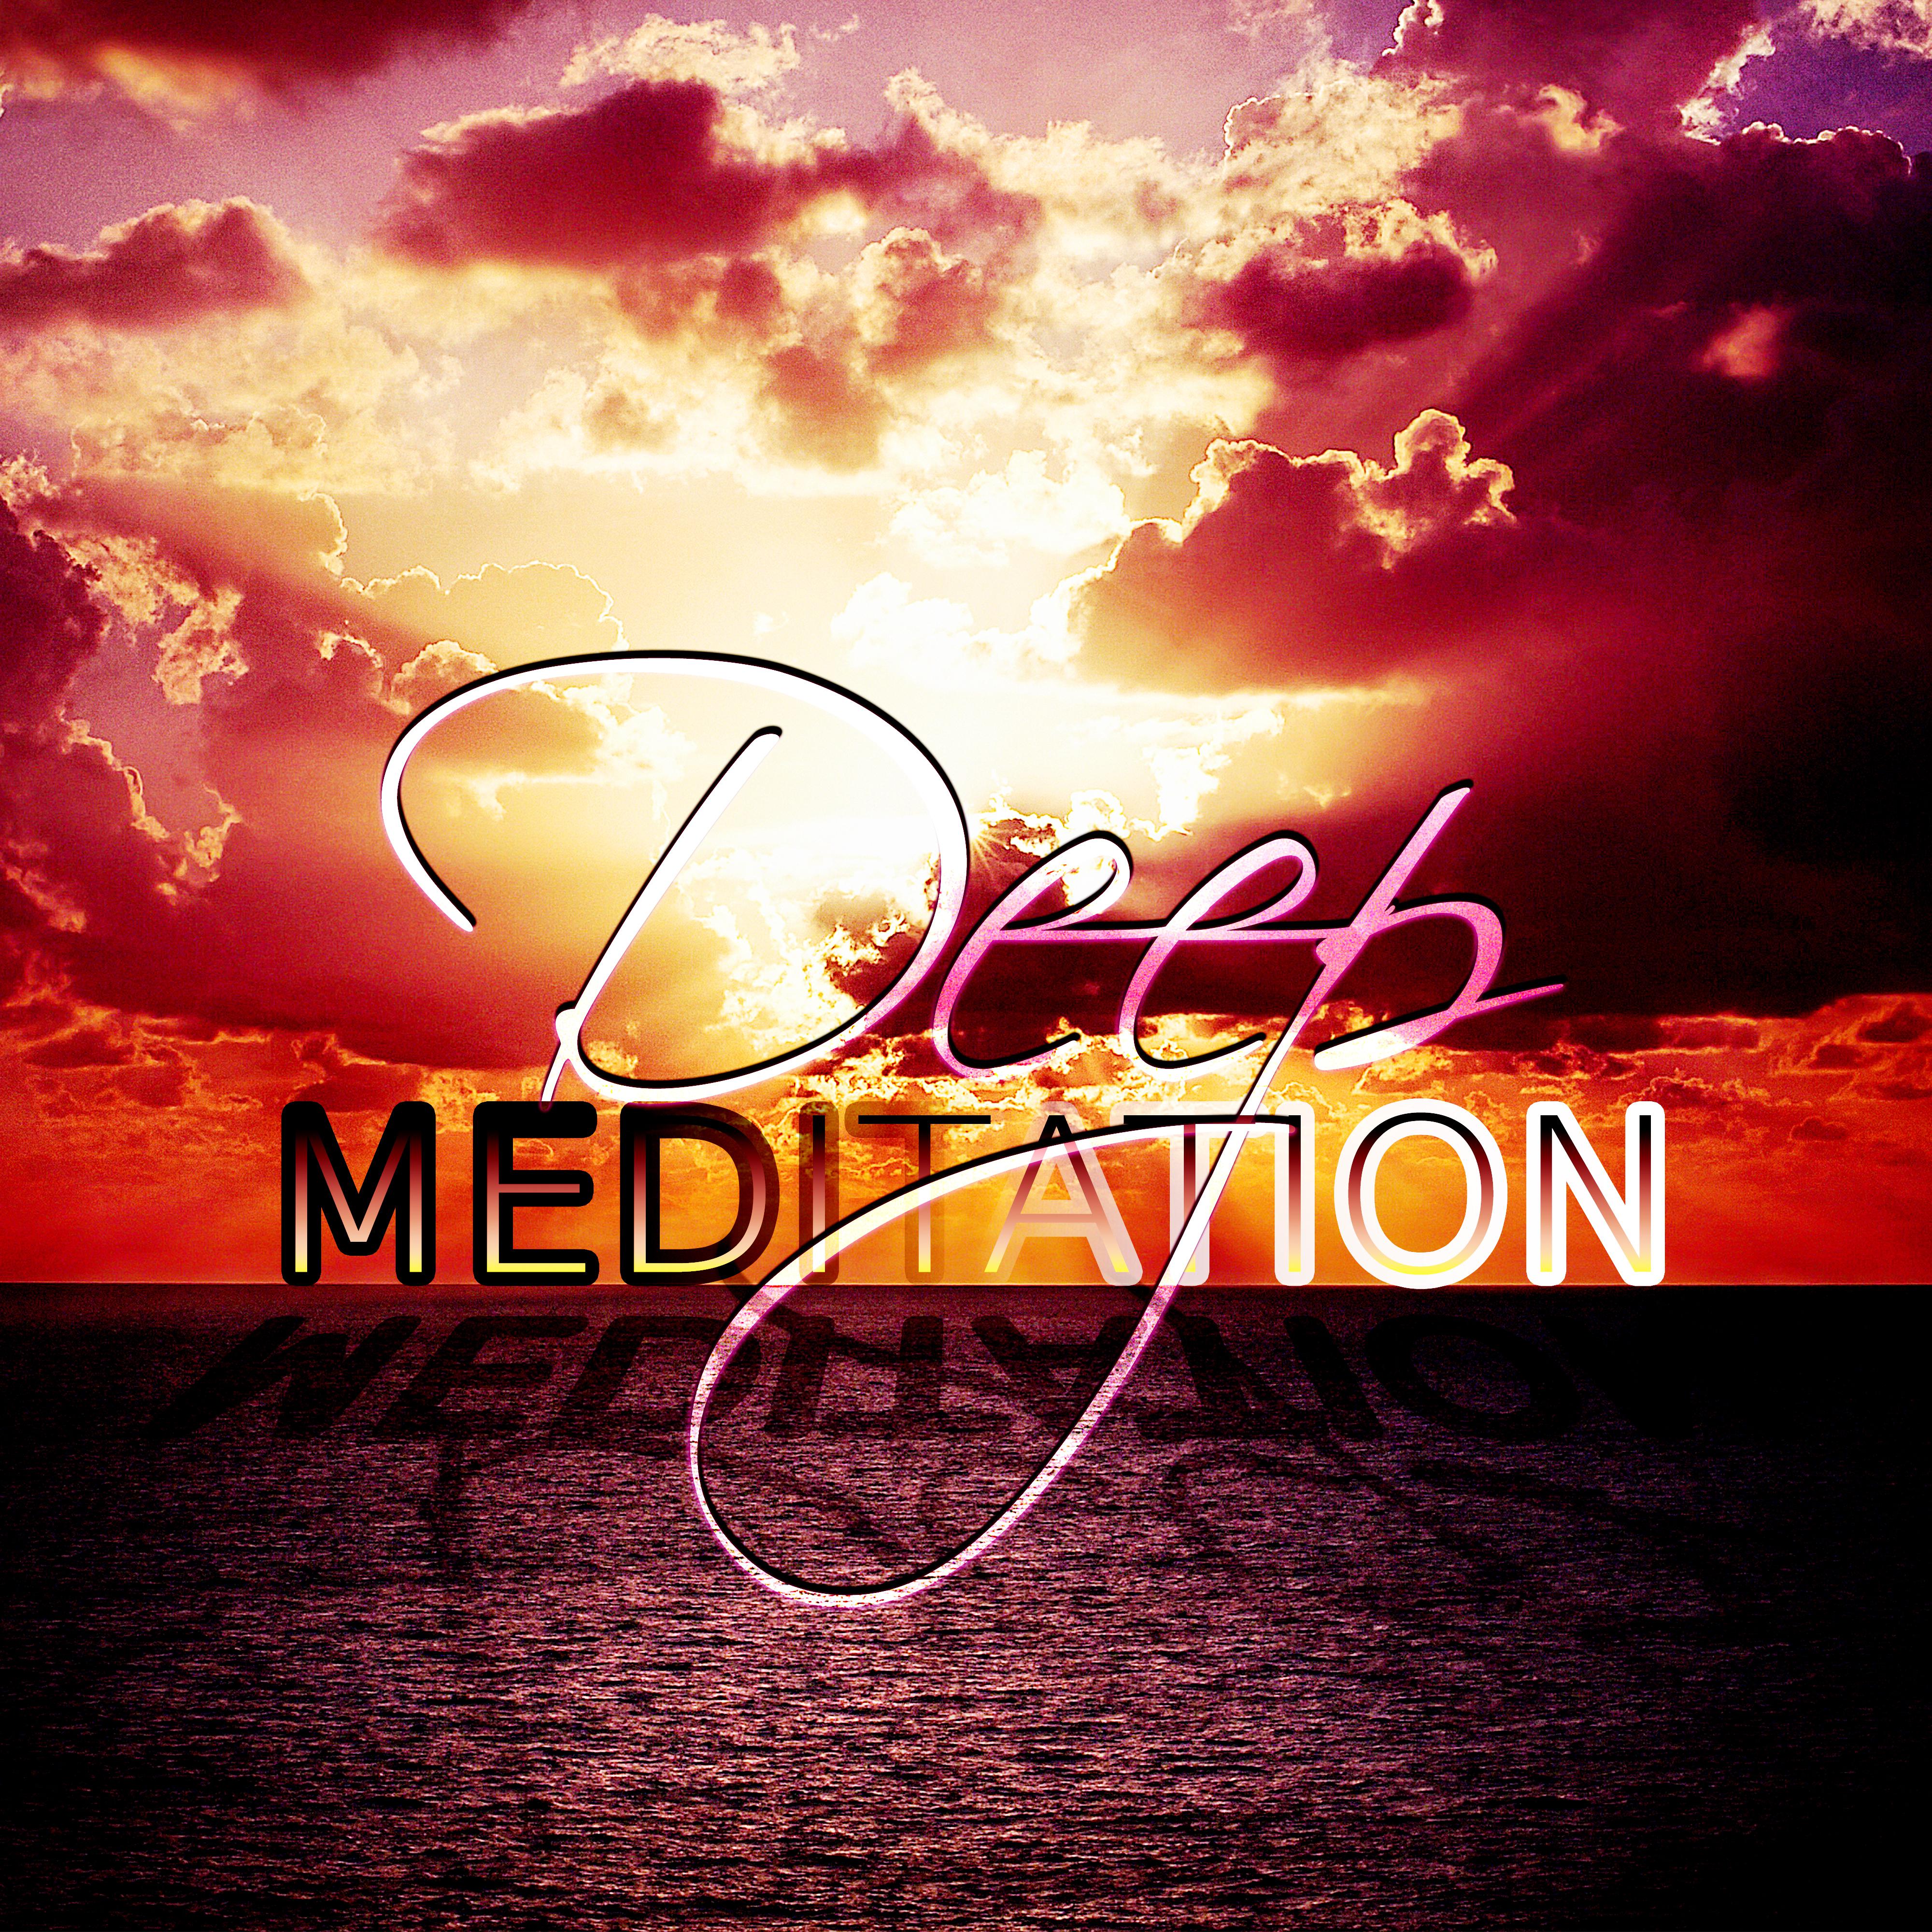 Deep Meditation - Soothing Music for Guided Meditation, Spirituality, Inner Peace, Sleep Meditation, Buddhist Meditation, Hatha Yoga, Well Being, Healing Music